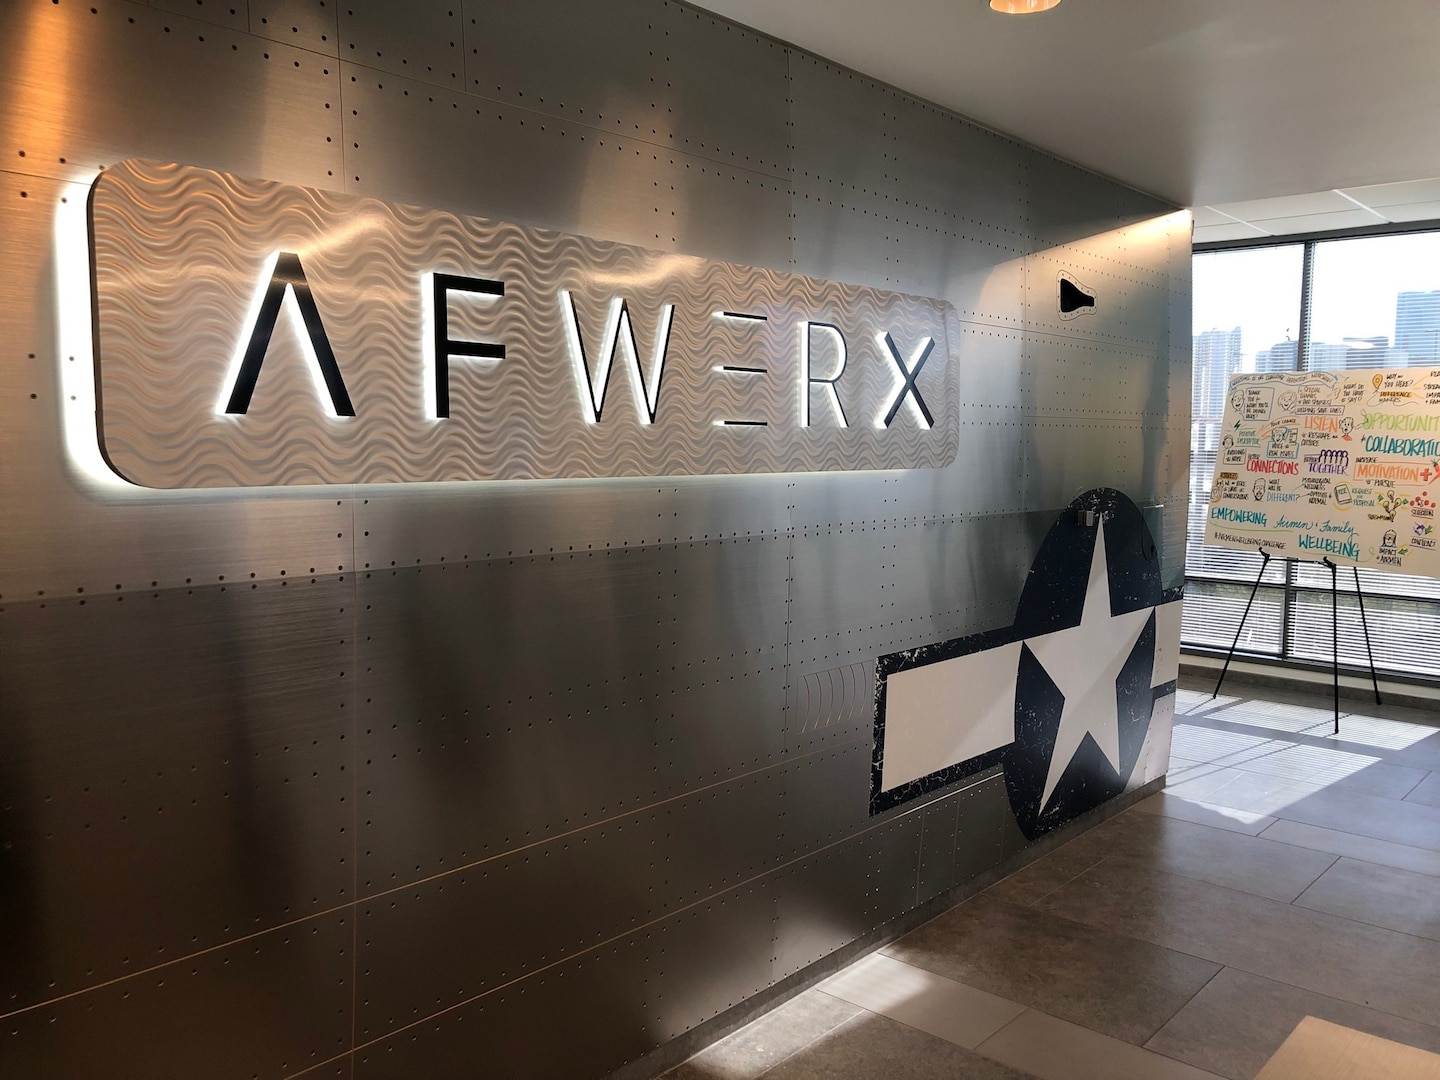 The 152nd Airlift Wing, Nevada Air National Guard, became the newest unit to develop an AFWERX spark cell with the creation of "Silver State Spark" in February 2020. About 70 spark cells launched around the world since the U.S. Air Force debuted AFWERX in 2017, mostly active-duty.